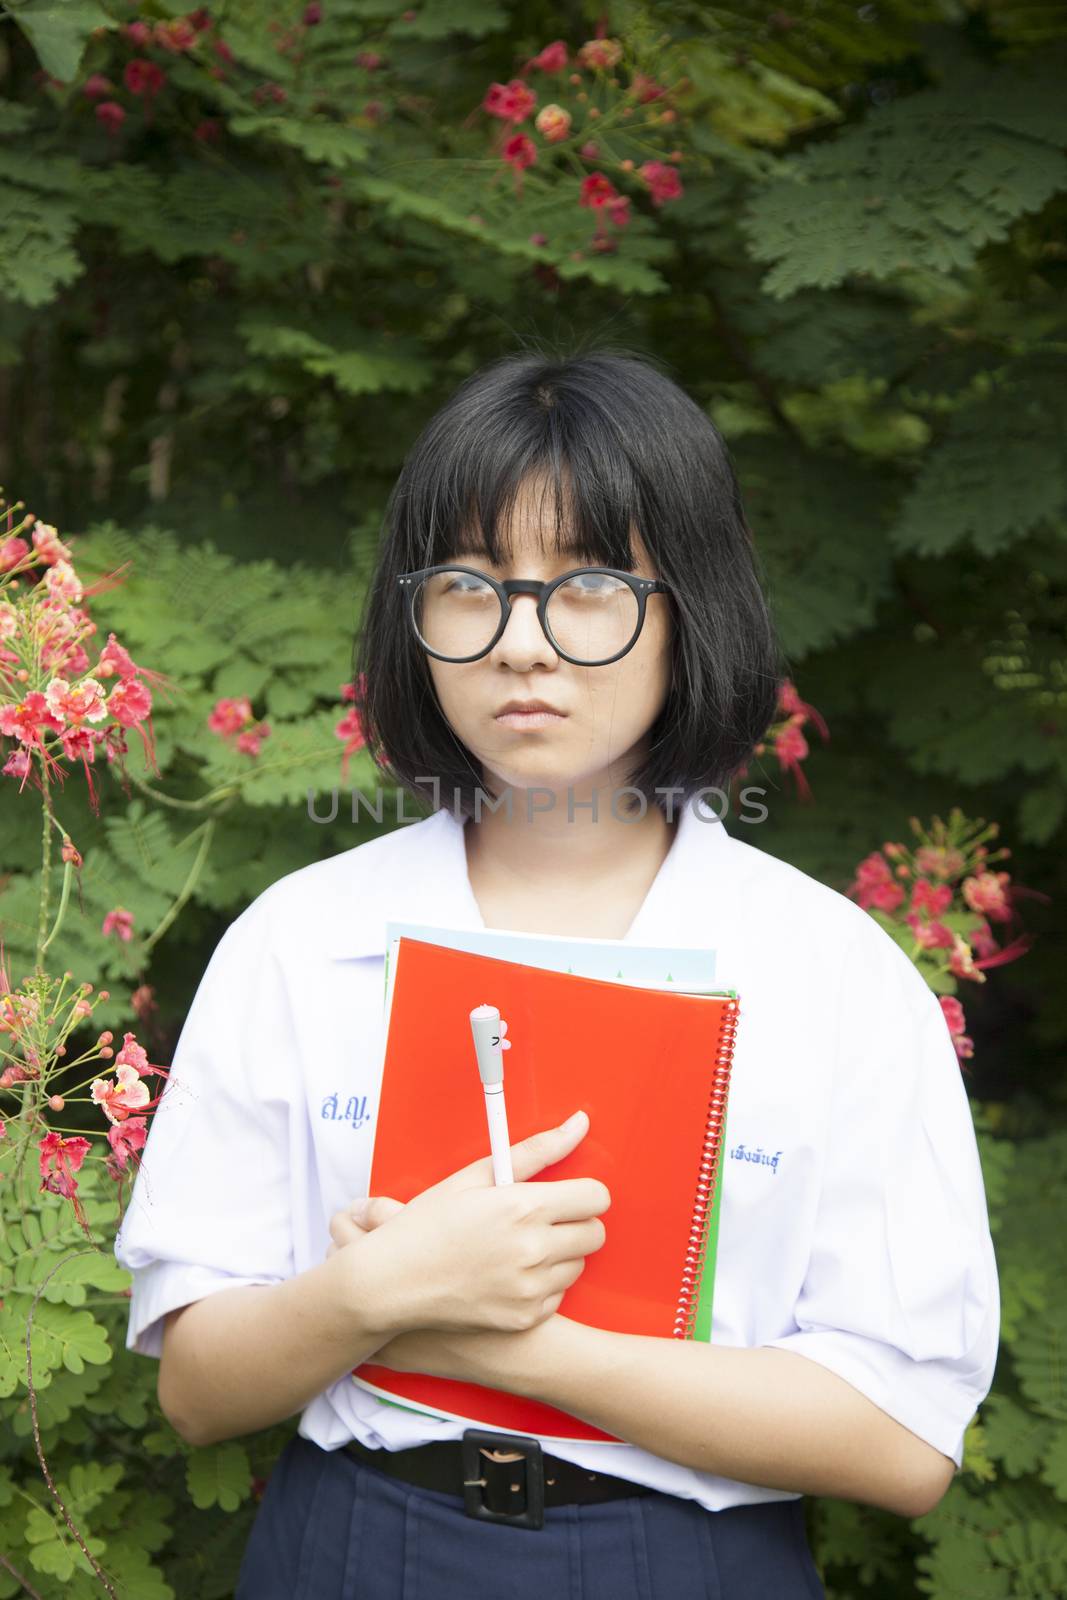 Schoolgirl with wear glasses looks sad. Standing near a tree with red flowers. Within the park